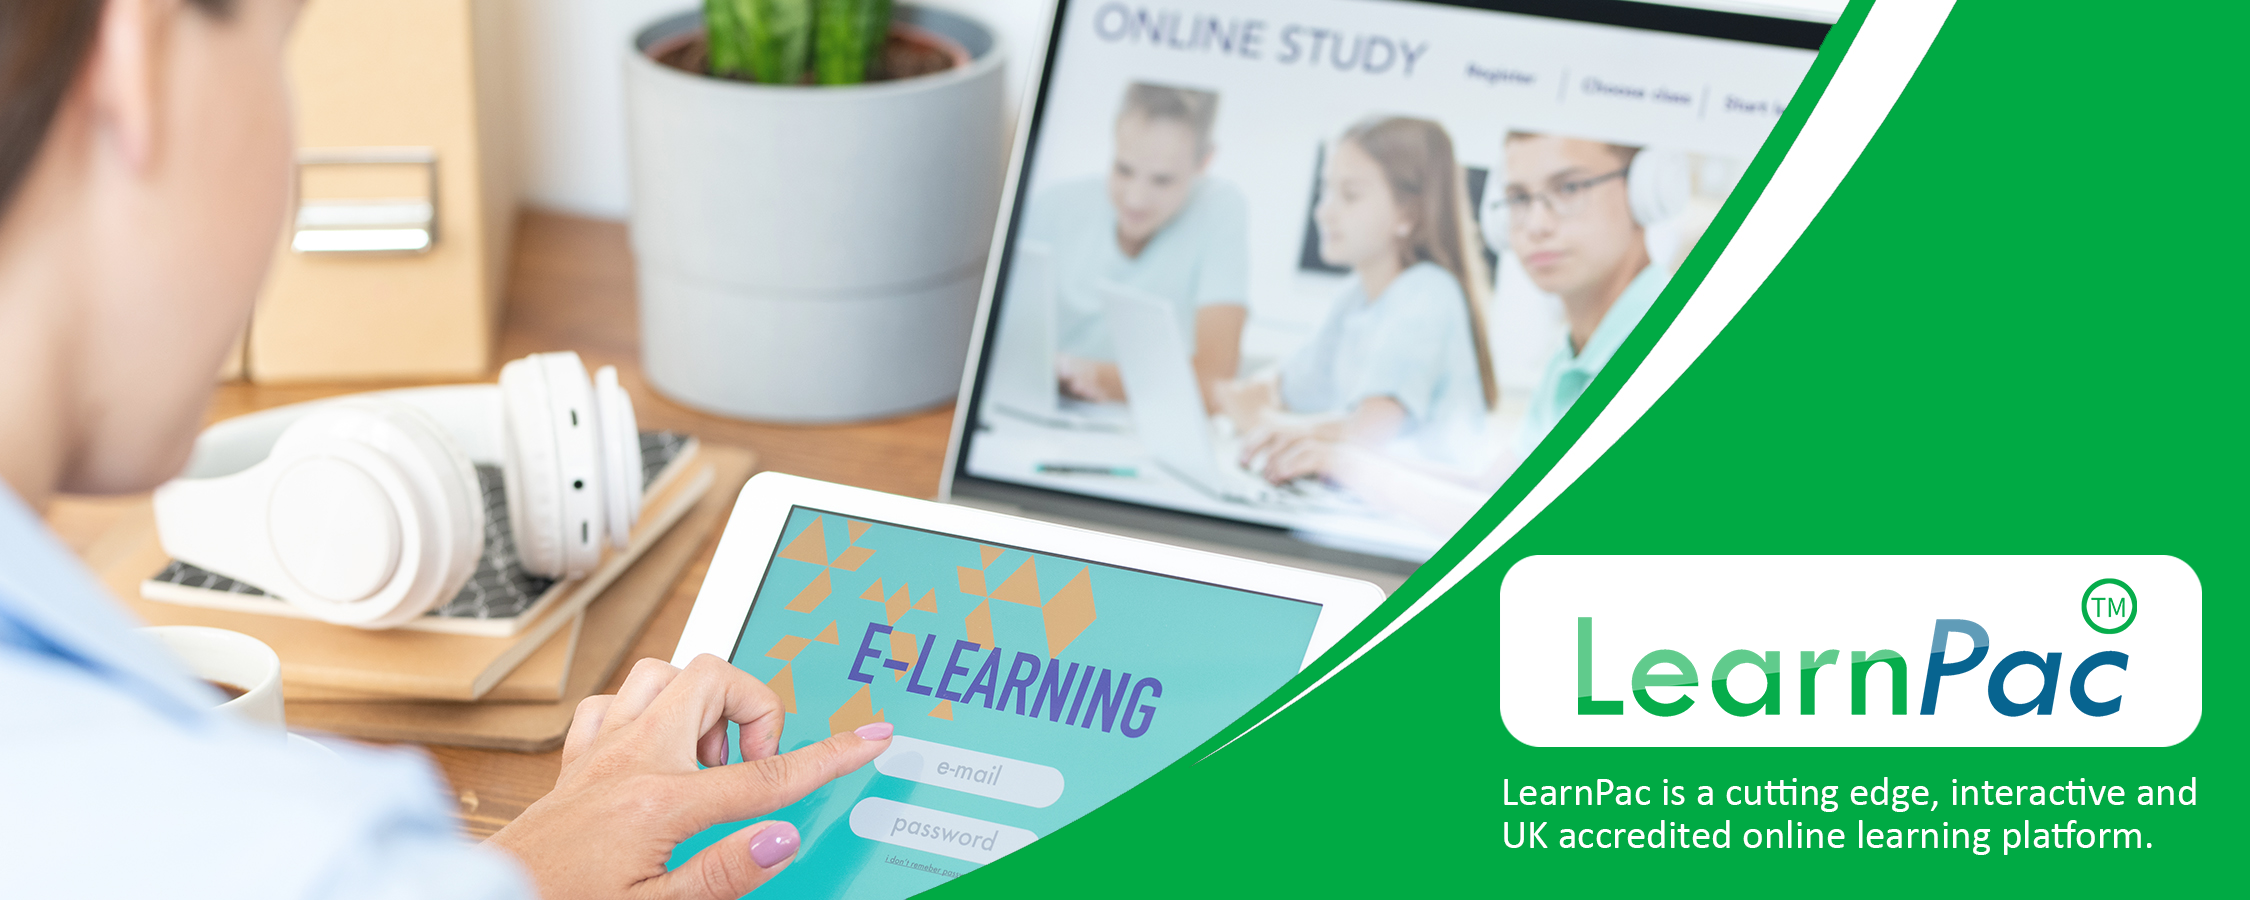 First Aid, CPR and AED Training - Online Learning Courses - E-Learning Courses - LearnPac Systems UK -